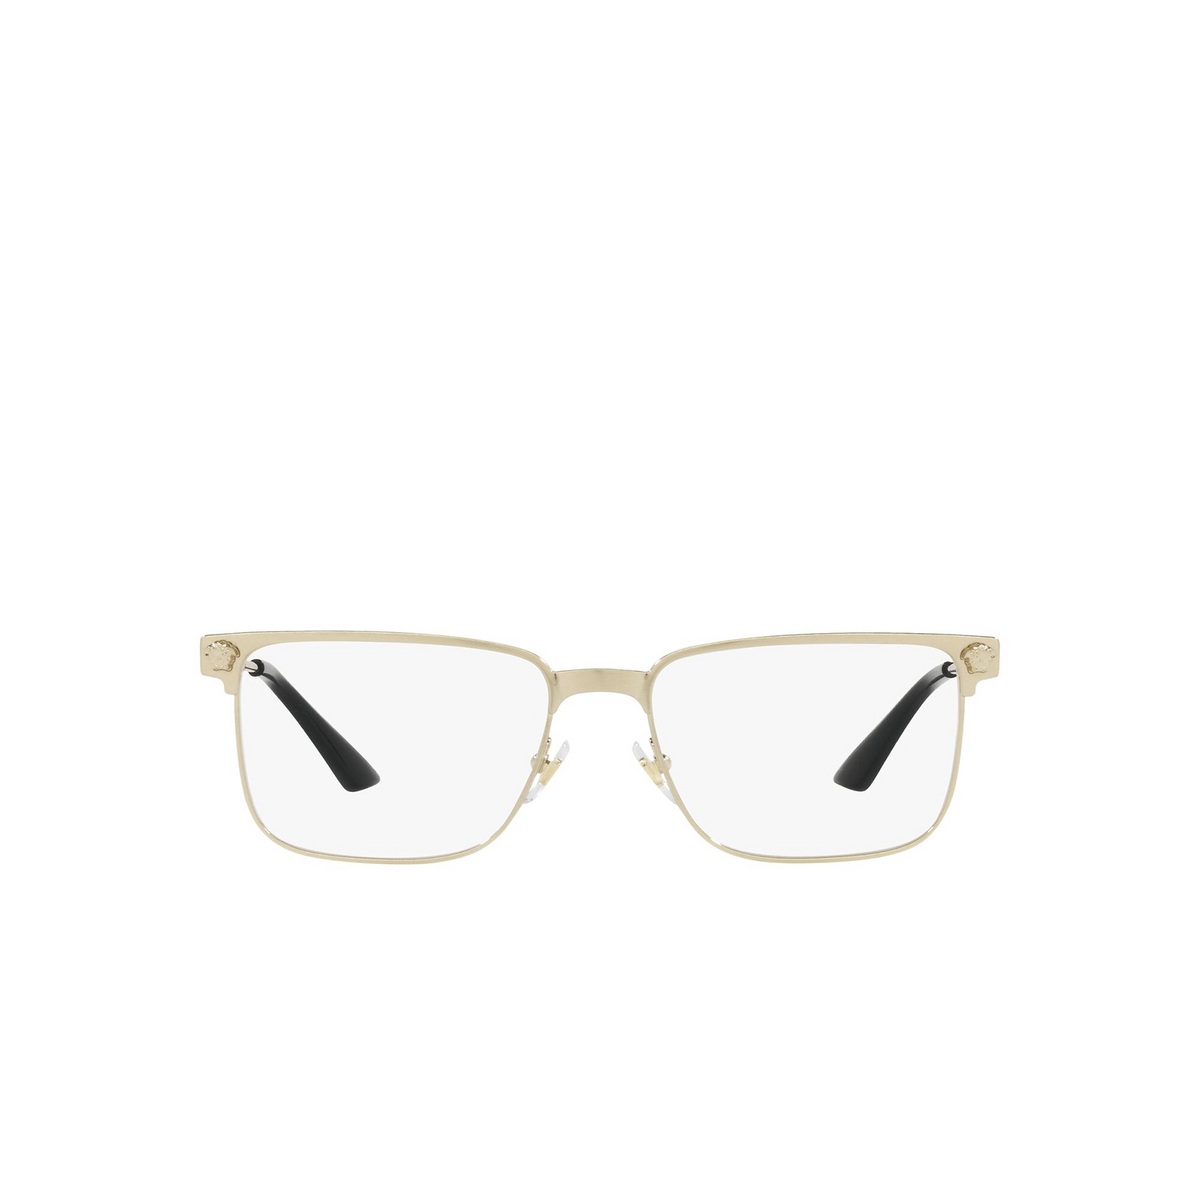 Versace VE1276 Eyeglasses 1339 Brushed Pale Gold - front view